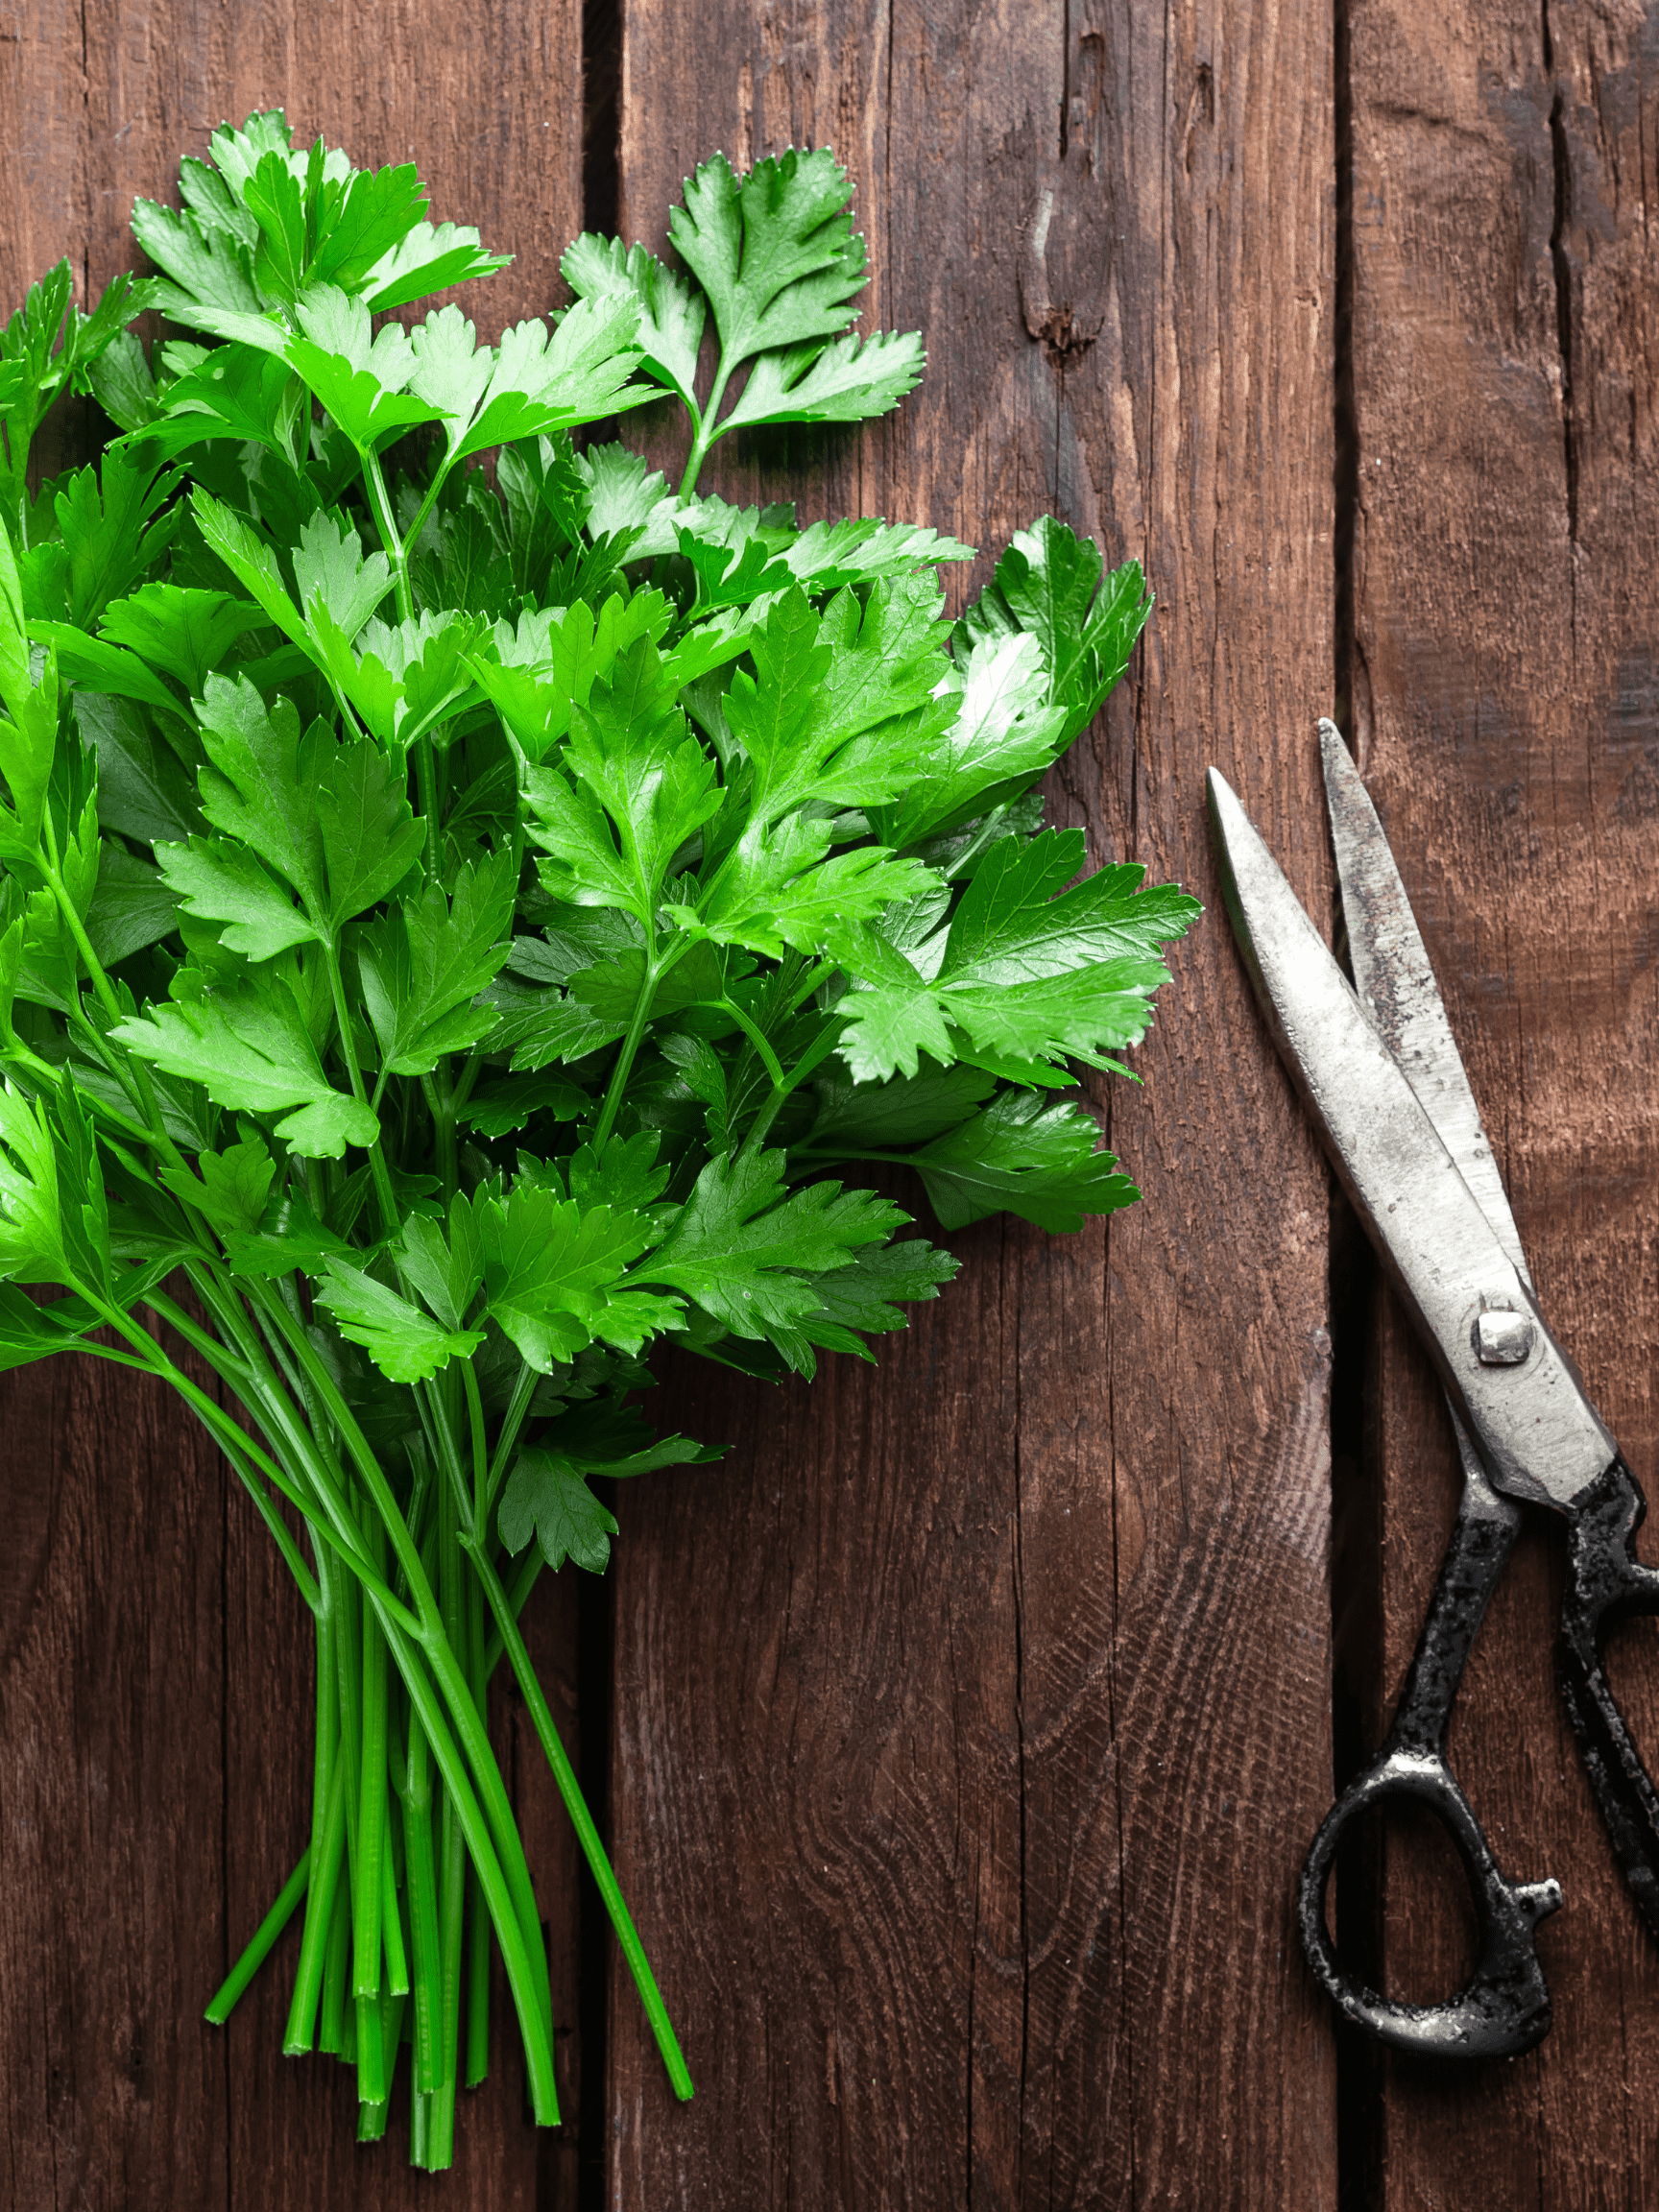 Parsley on a wooden backdrop with old scissors.